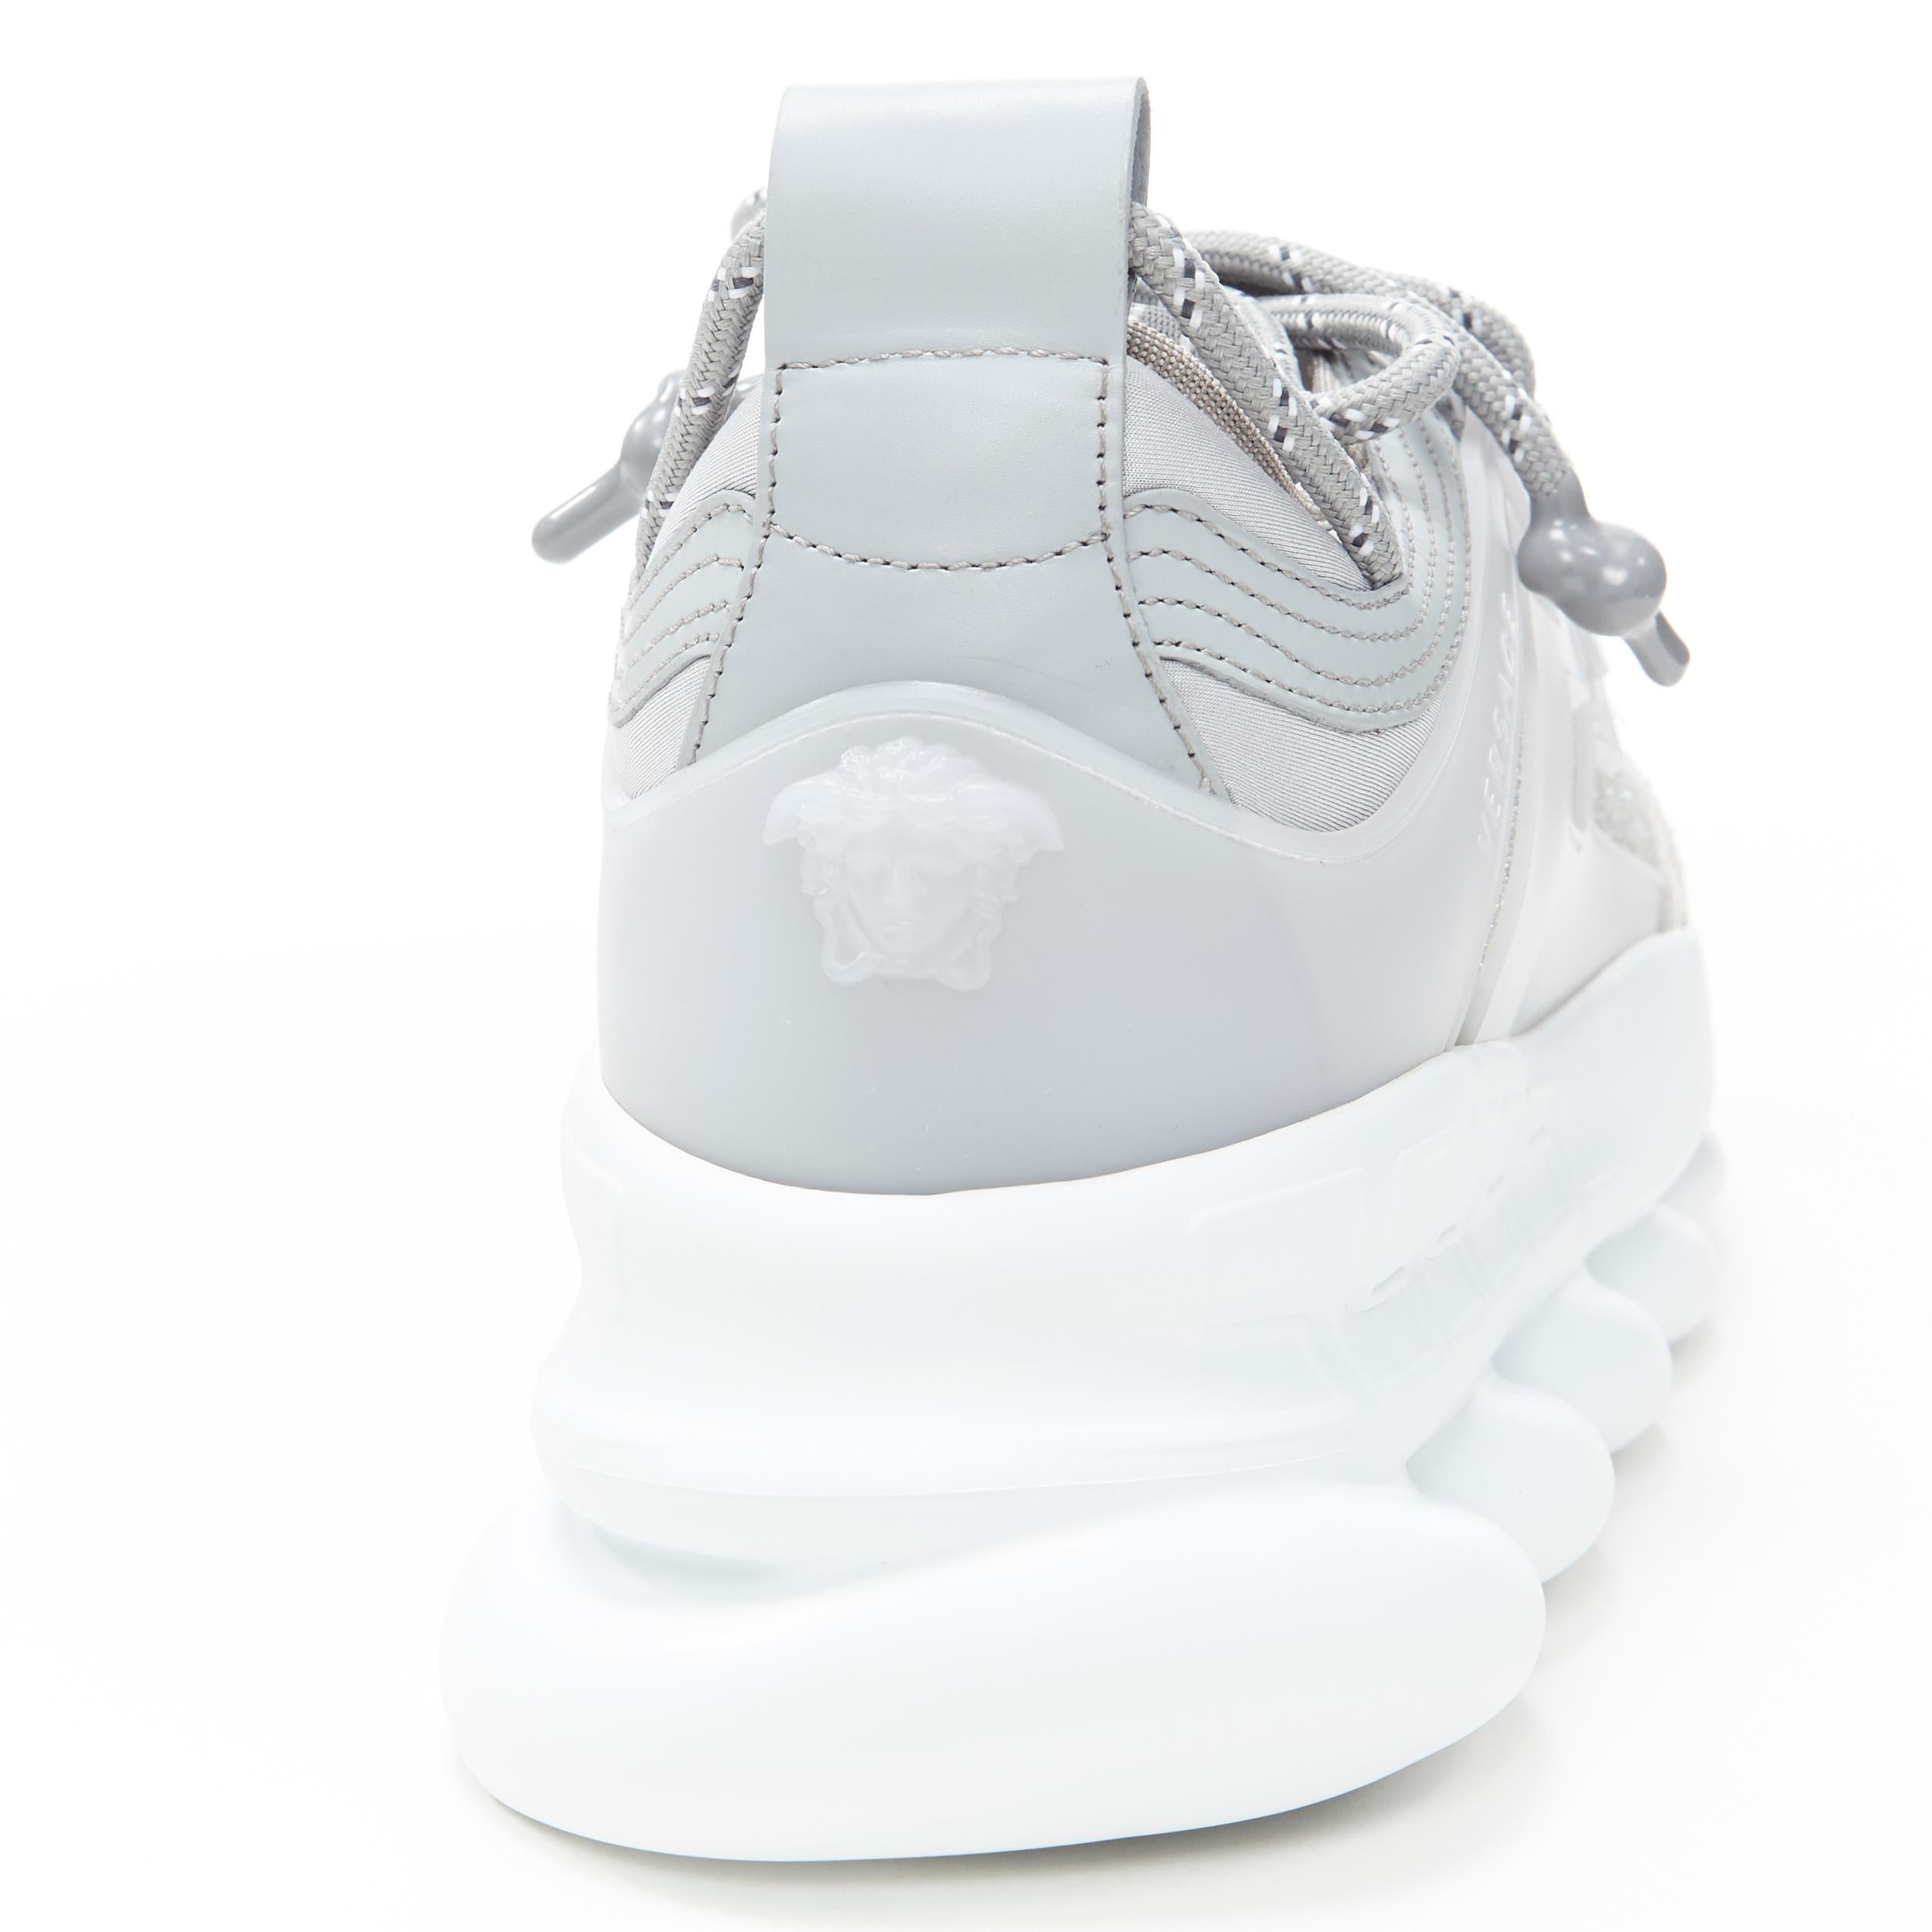 new VERSACE Chain Reaction Reflective Silver Crystal Rhinestone sneaker EU41 US8 For Sale 3